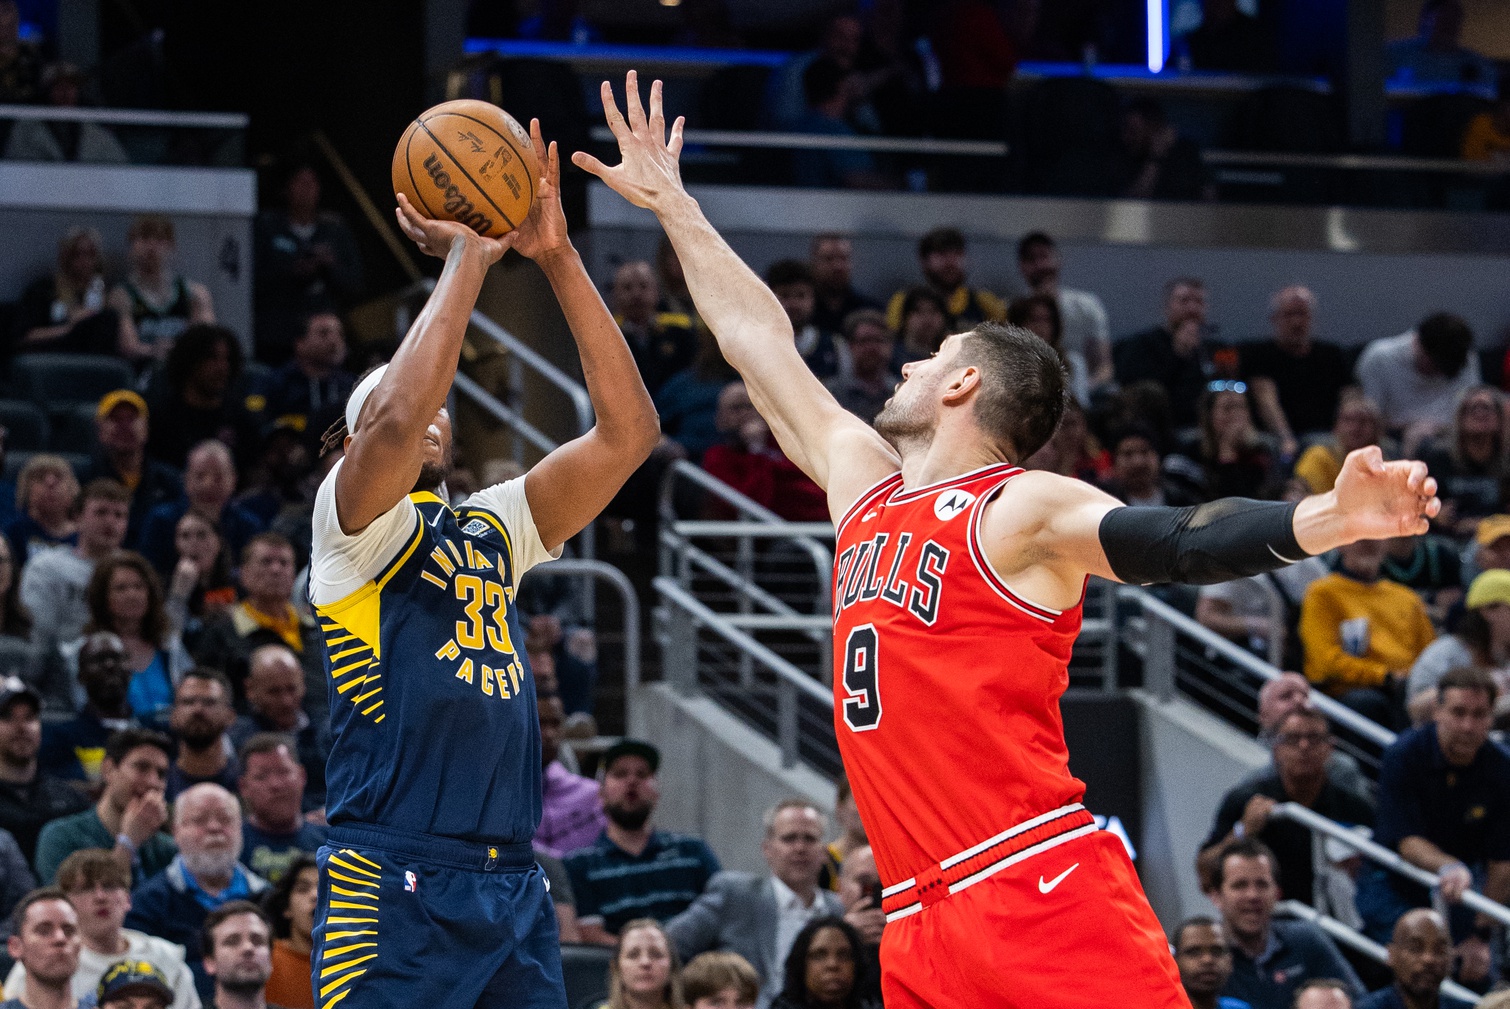 Indiana Pacers center Myles Turner (33) shoots the ball while Chicago Bulls center Nikola Vucevic (9) defends in the second half at Gainbridge Fieldhouse.